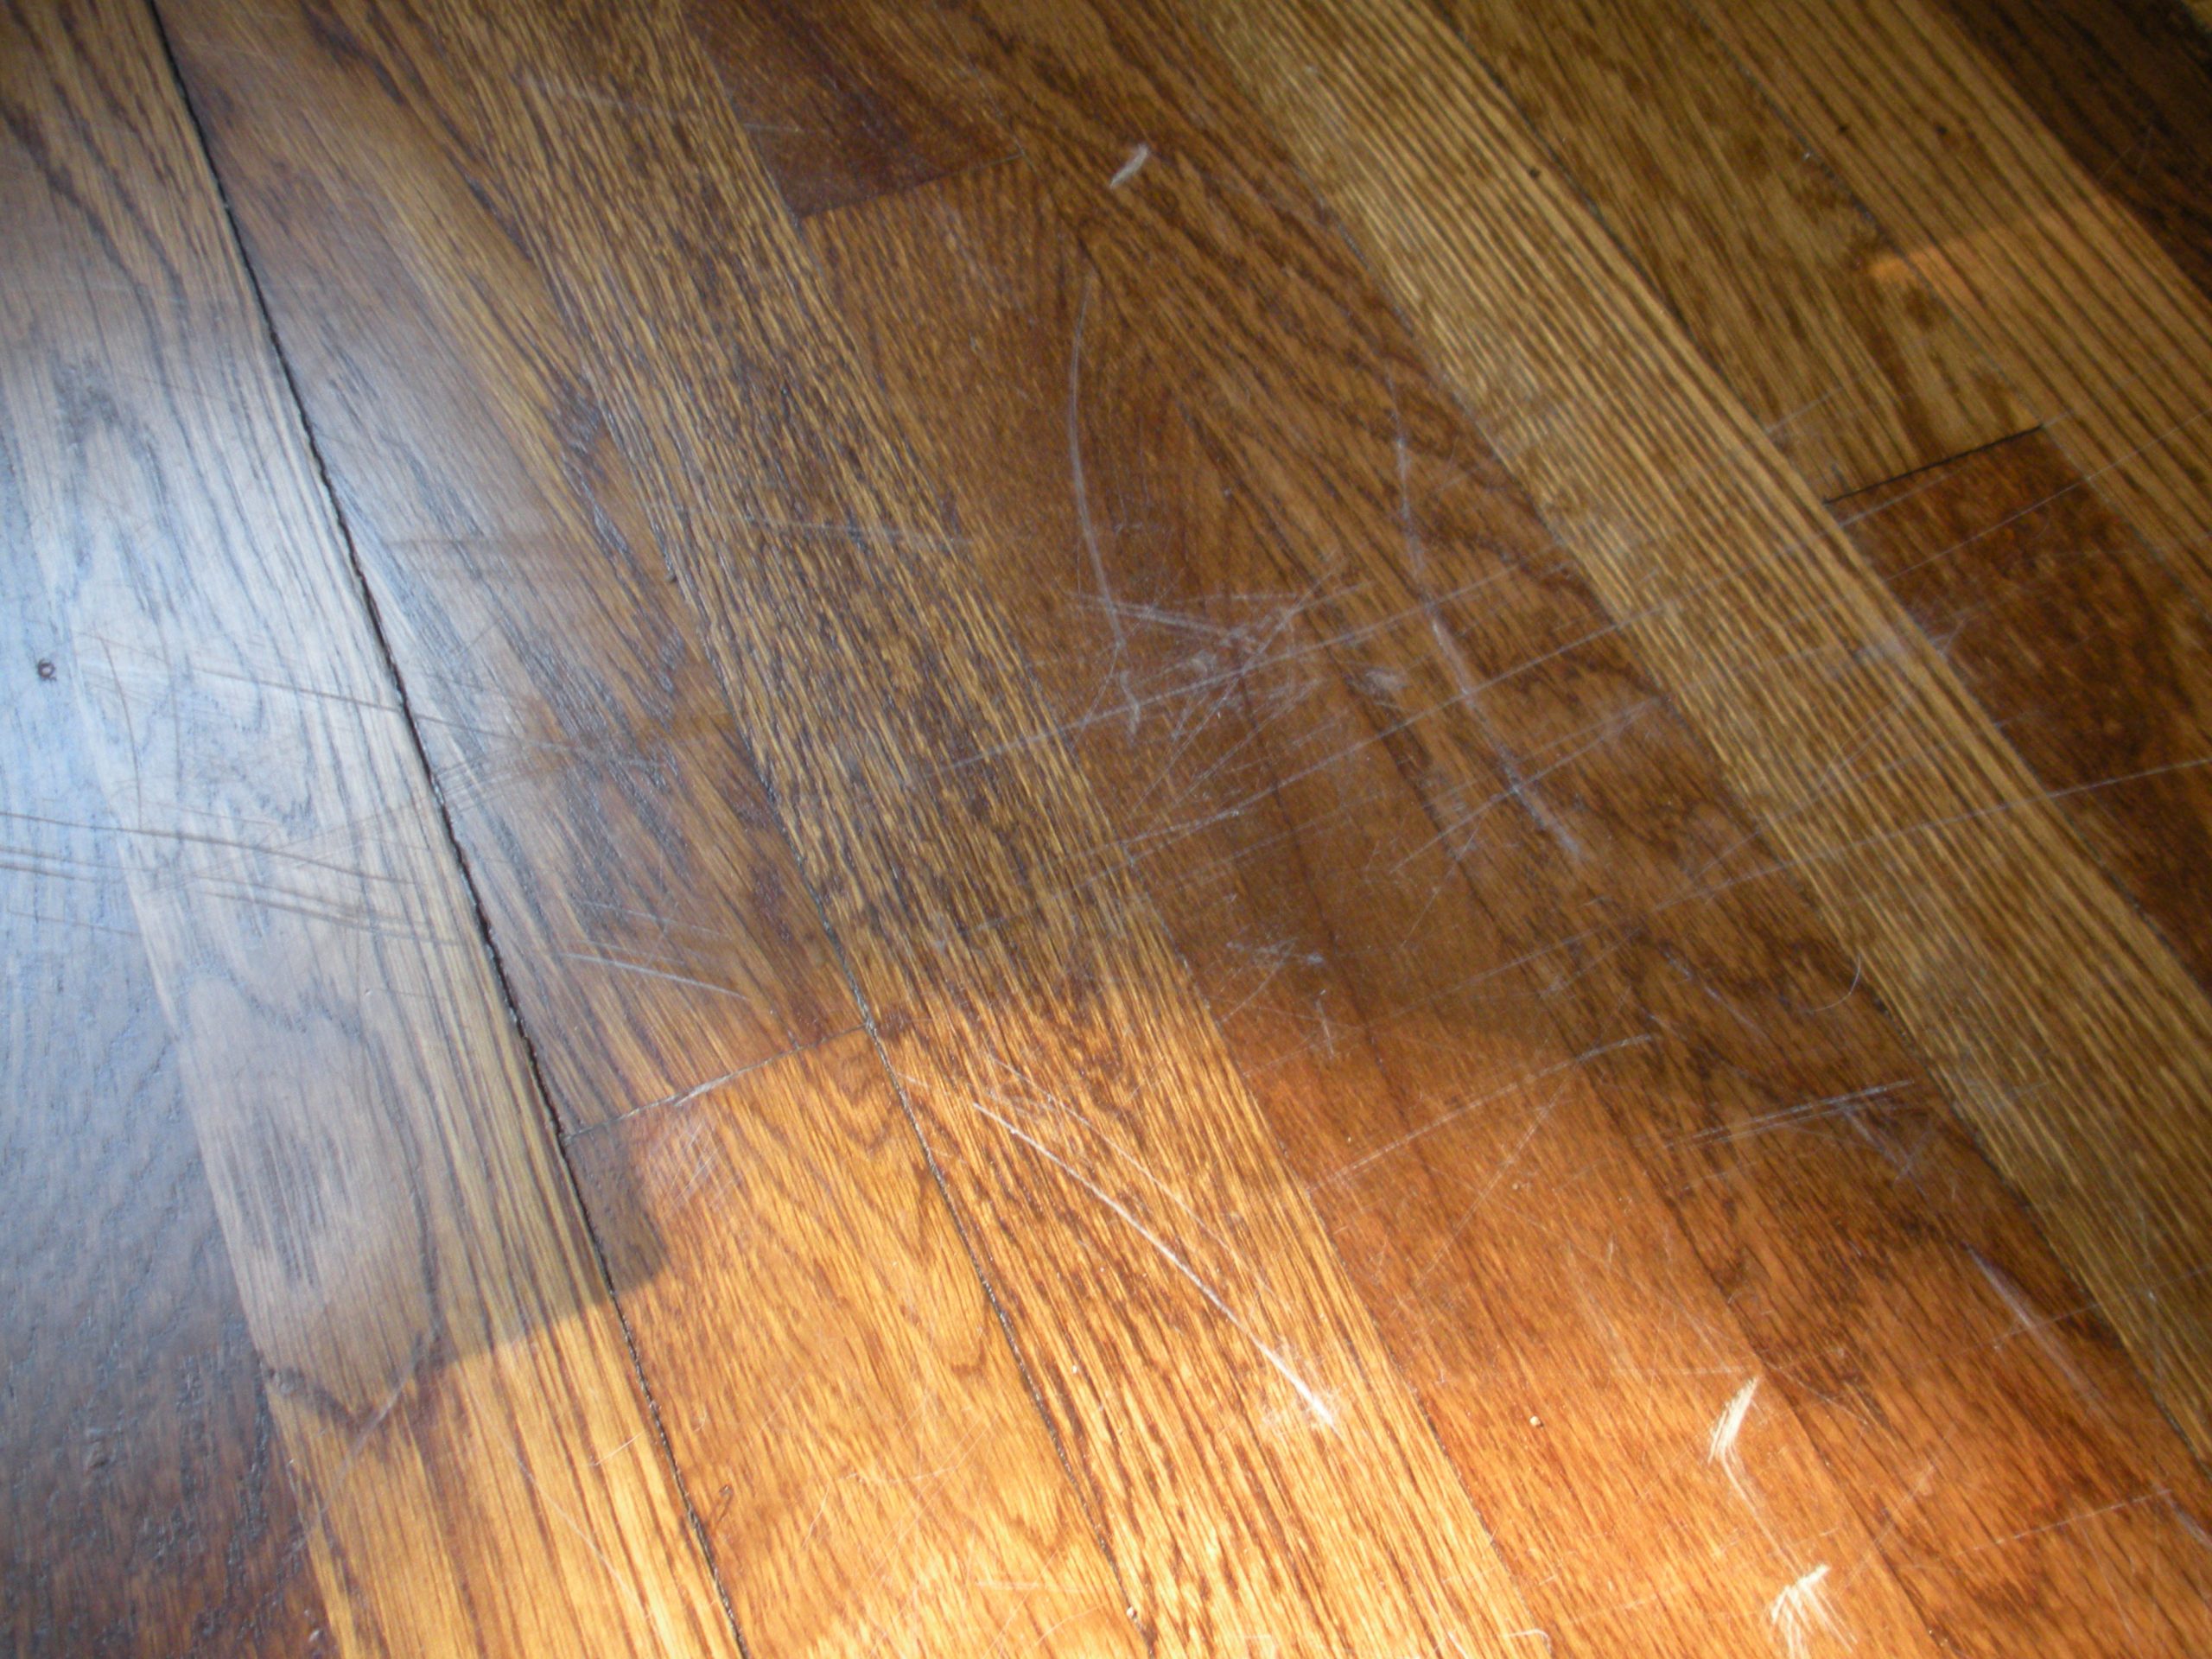 Wooden Flooring Gets Scratches Easily